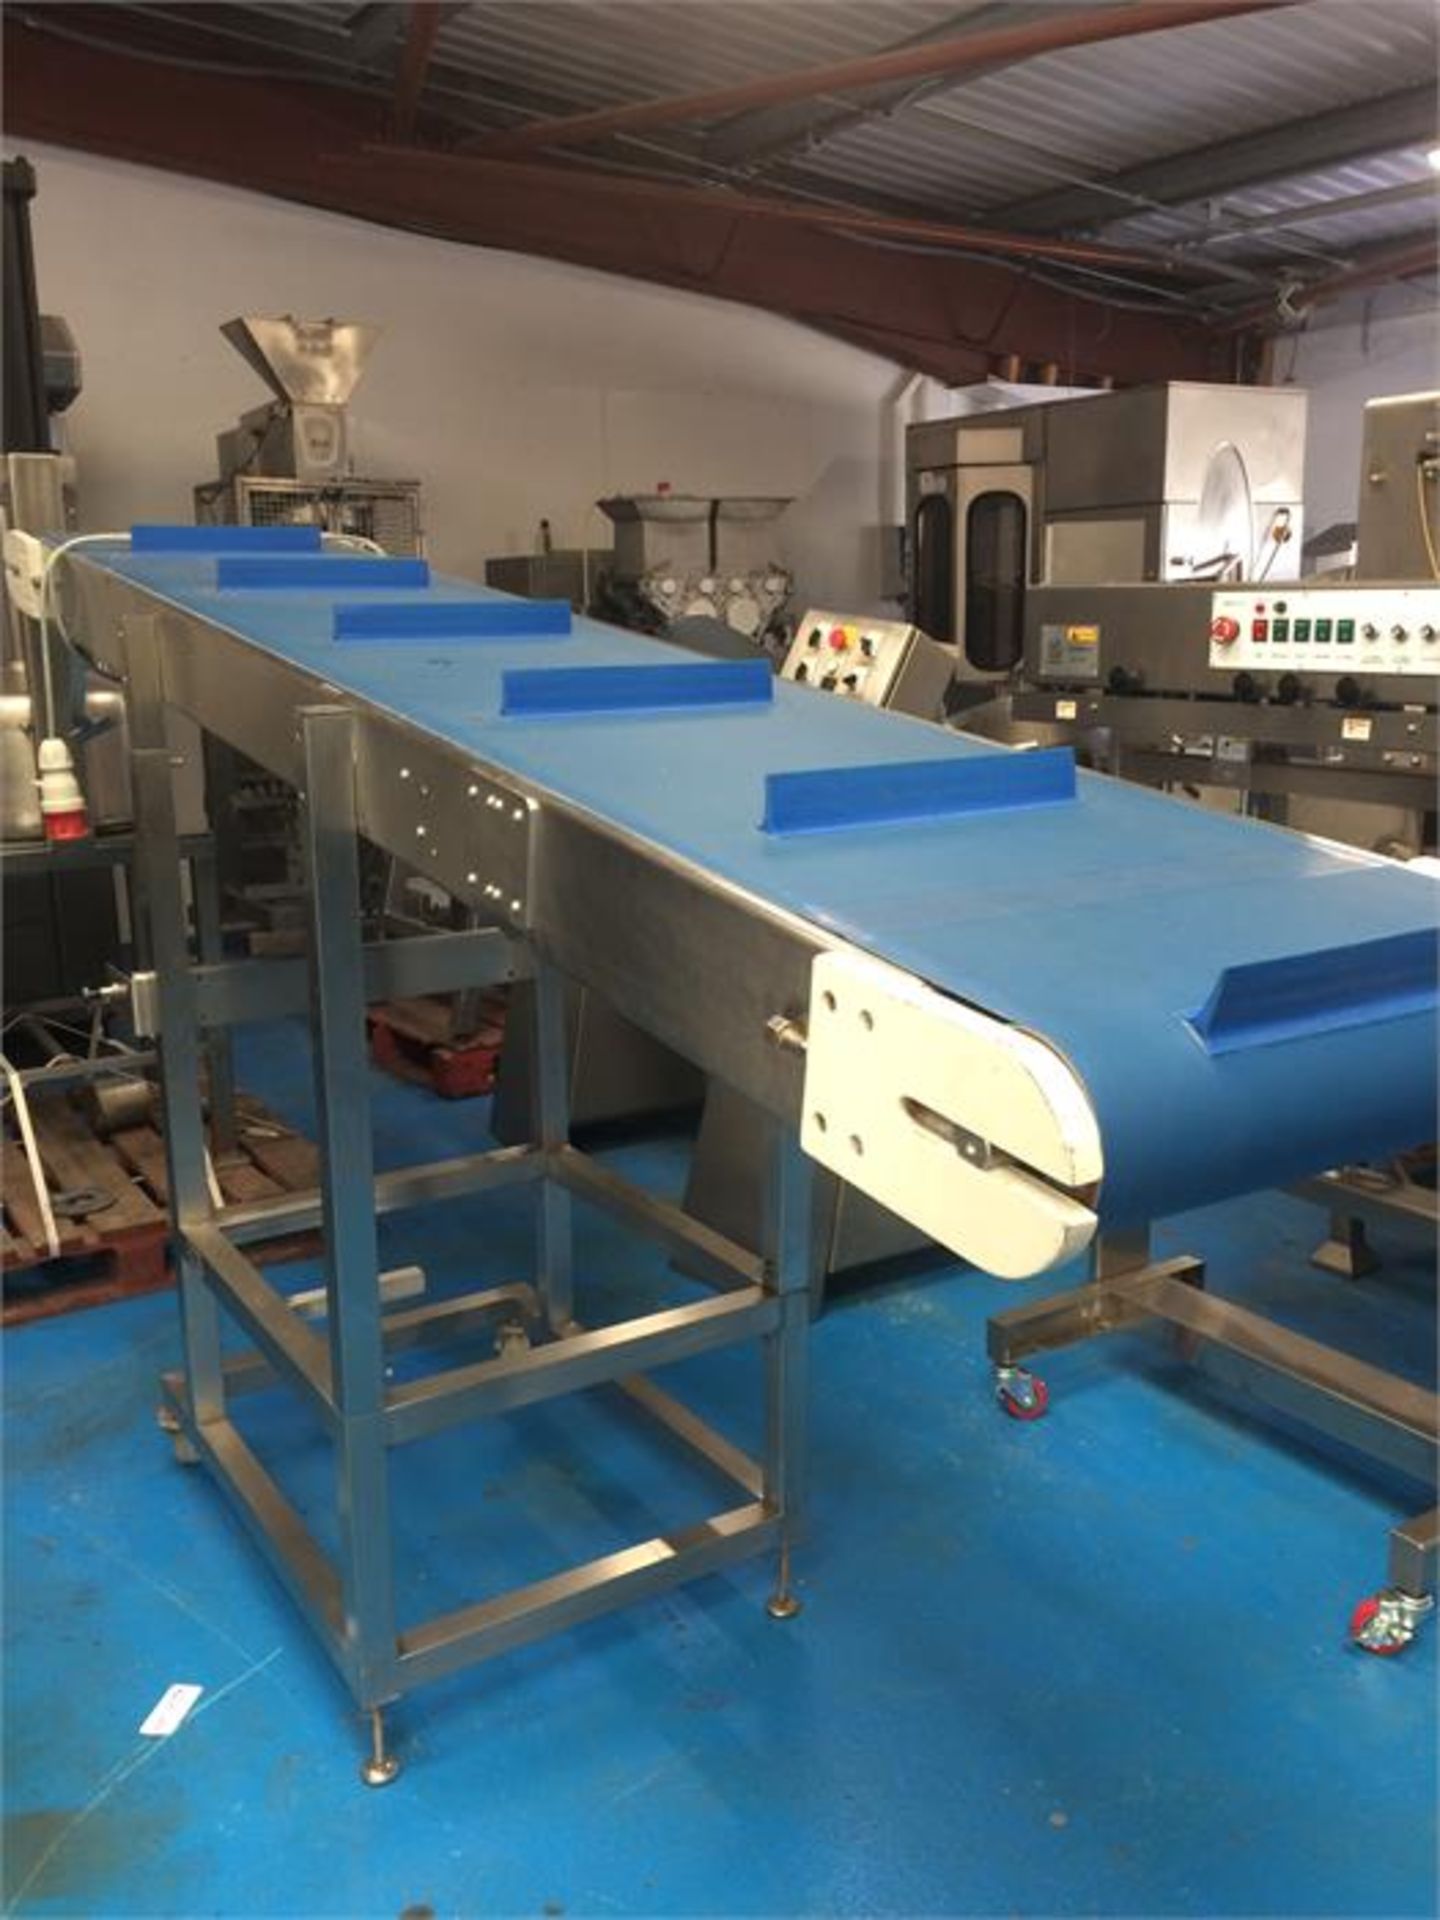 1 x All s/s framed neoprene belt incline transfer conveyor. Taking product from a height of 1200mm